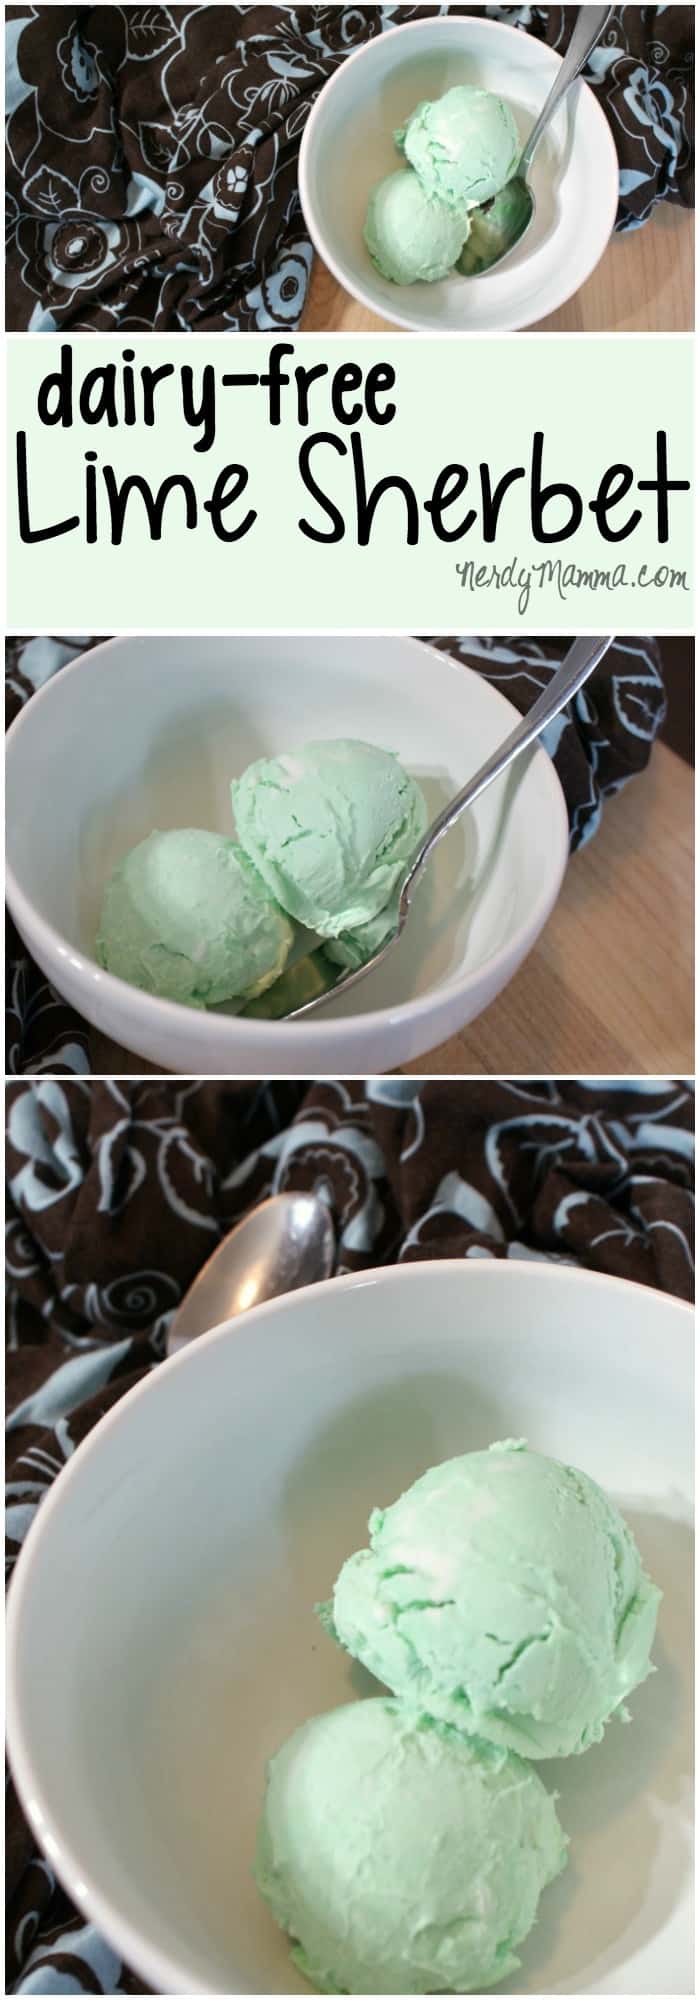 This dairy-free lime sherbet recipe is so mouthwateringly awesome. I could eat a gallon...